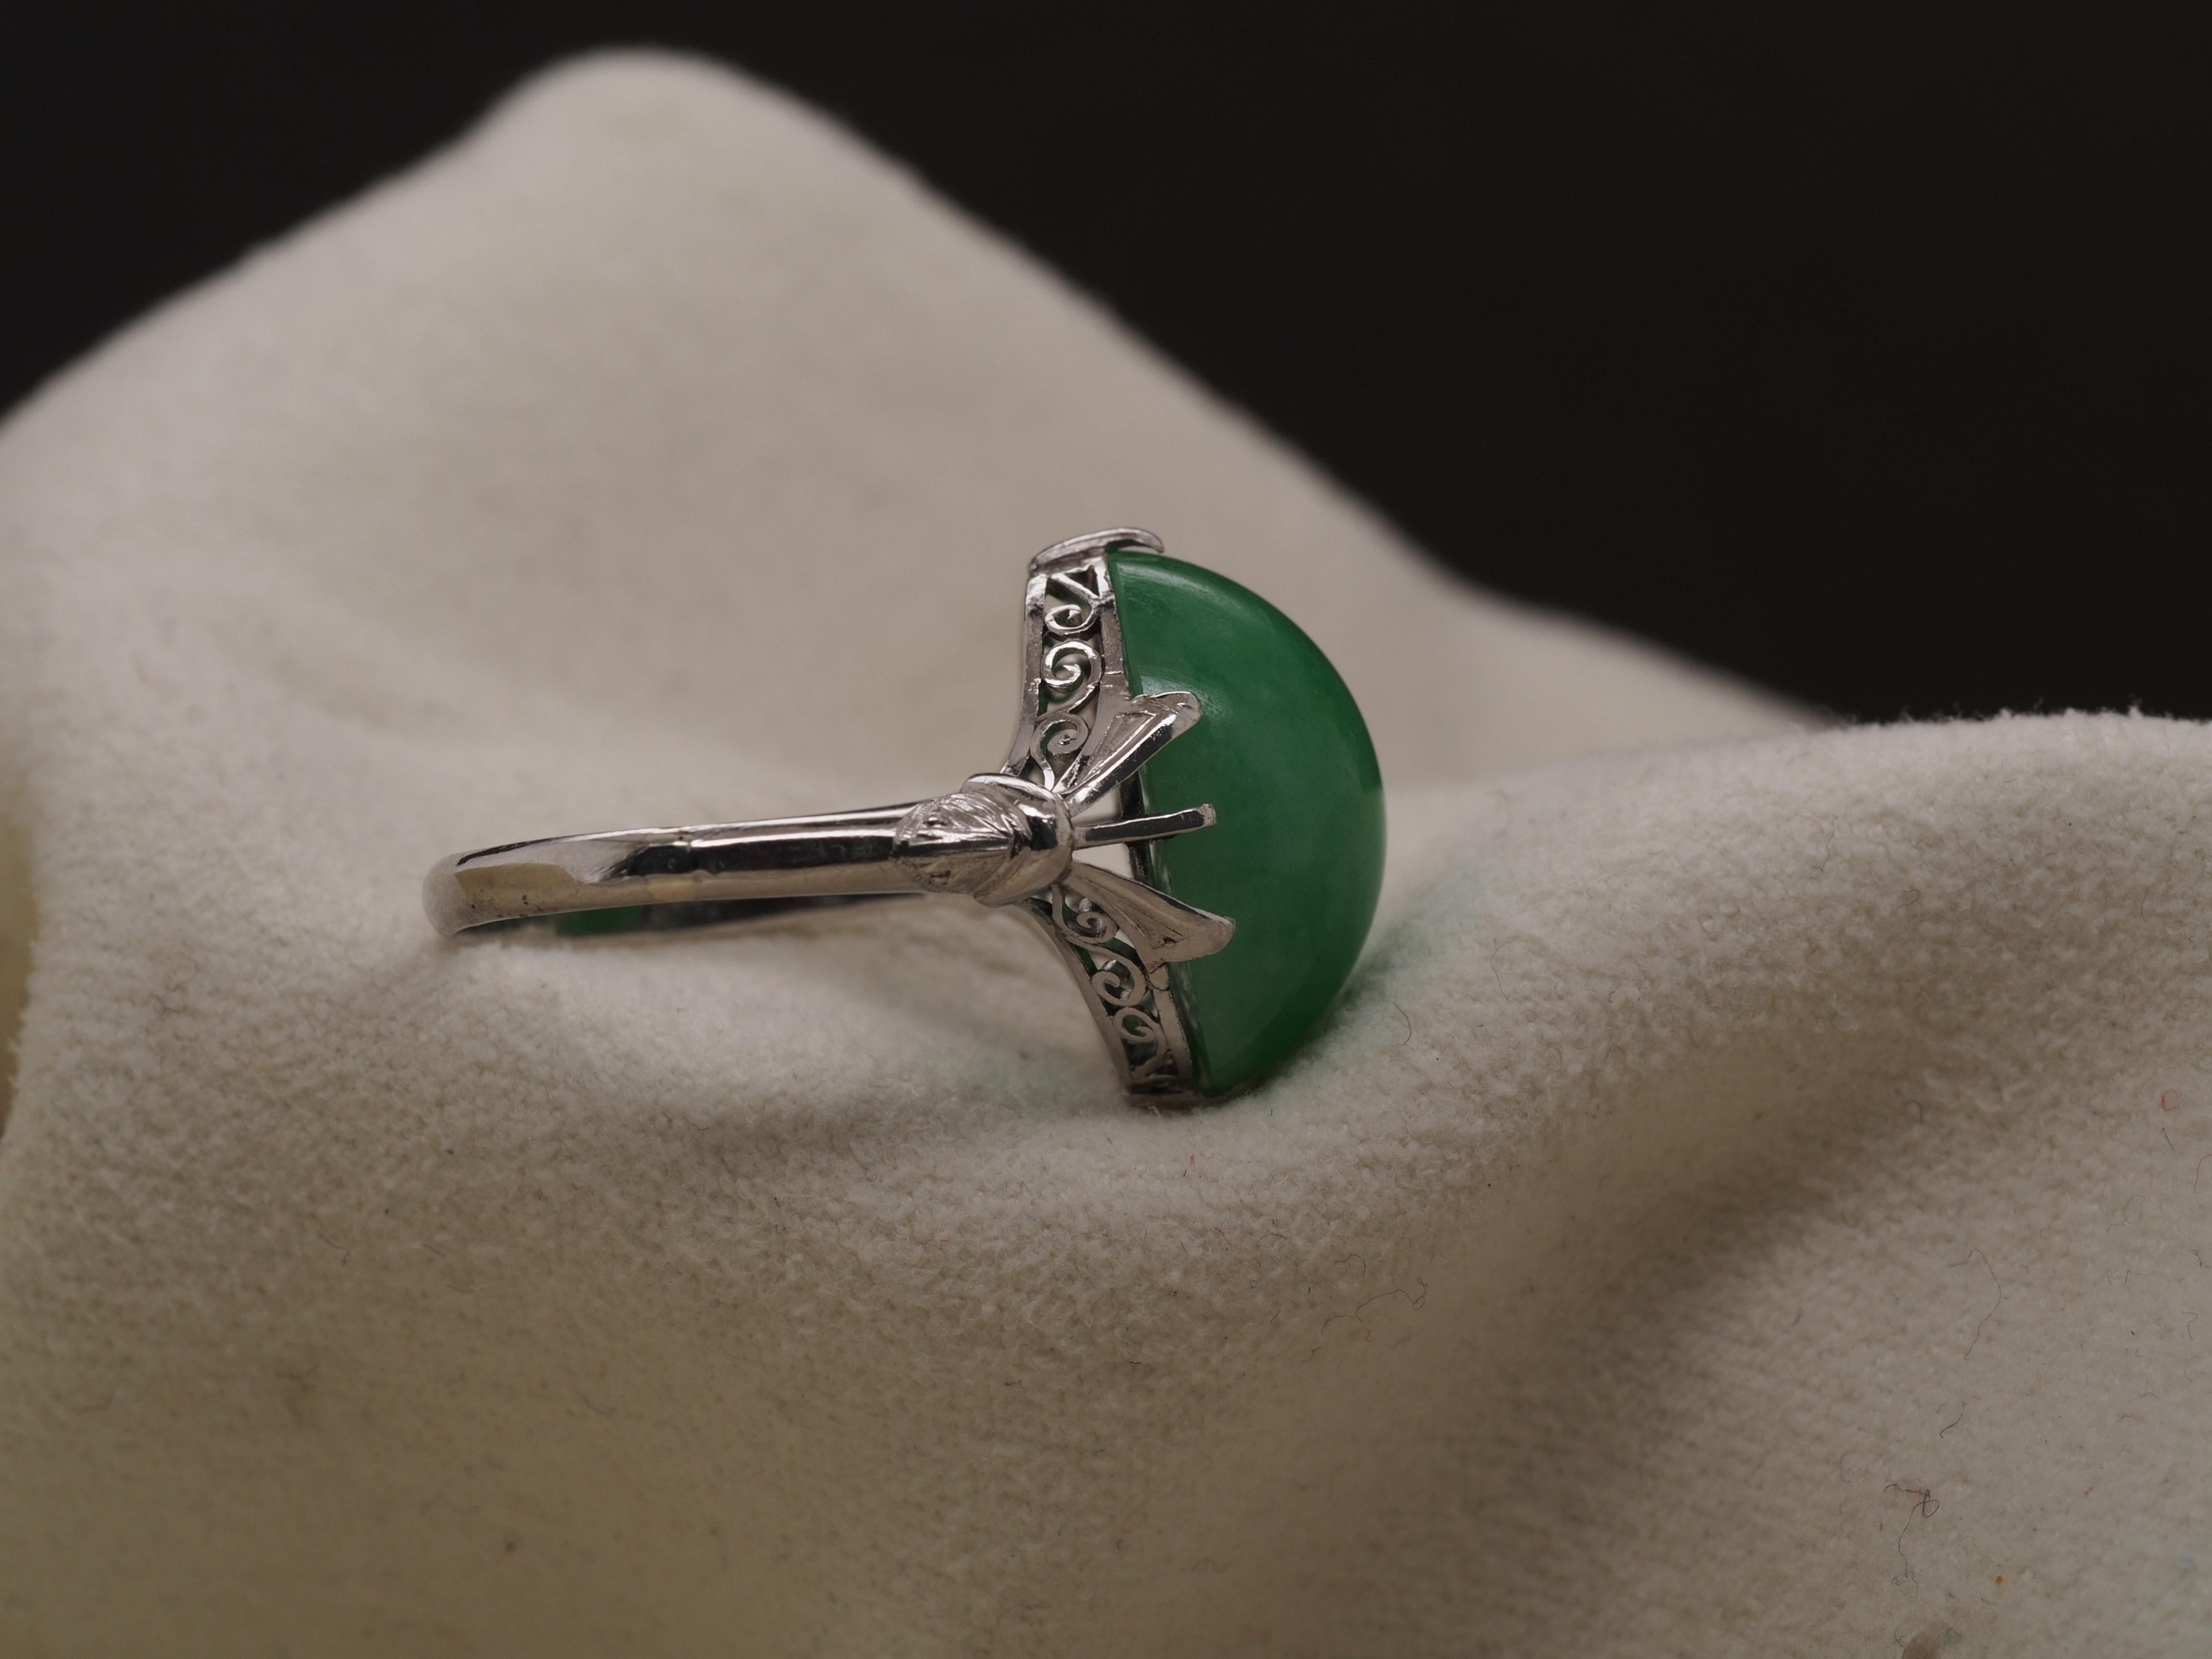 Item Details:
Ring Size: 6.75
Metal Type: Platinum [Hallmarked, and Tested]
Weight: 5 grams

Jade: 3ct, oval cabochon shape, green

Band Width: 2.1mm
Condition: Excellent

Price: $1500

This ring can be sized up or down 4 sizes for an additional